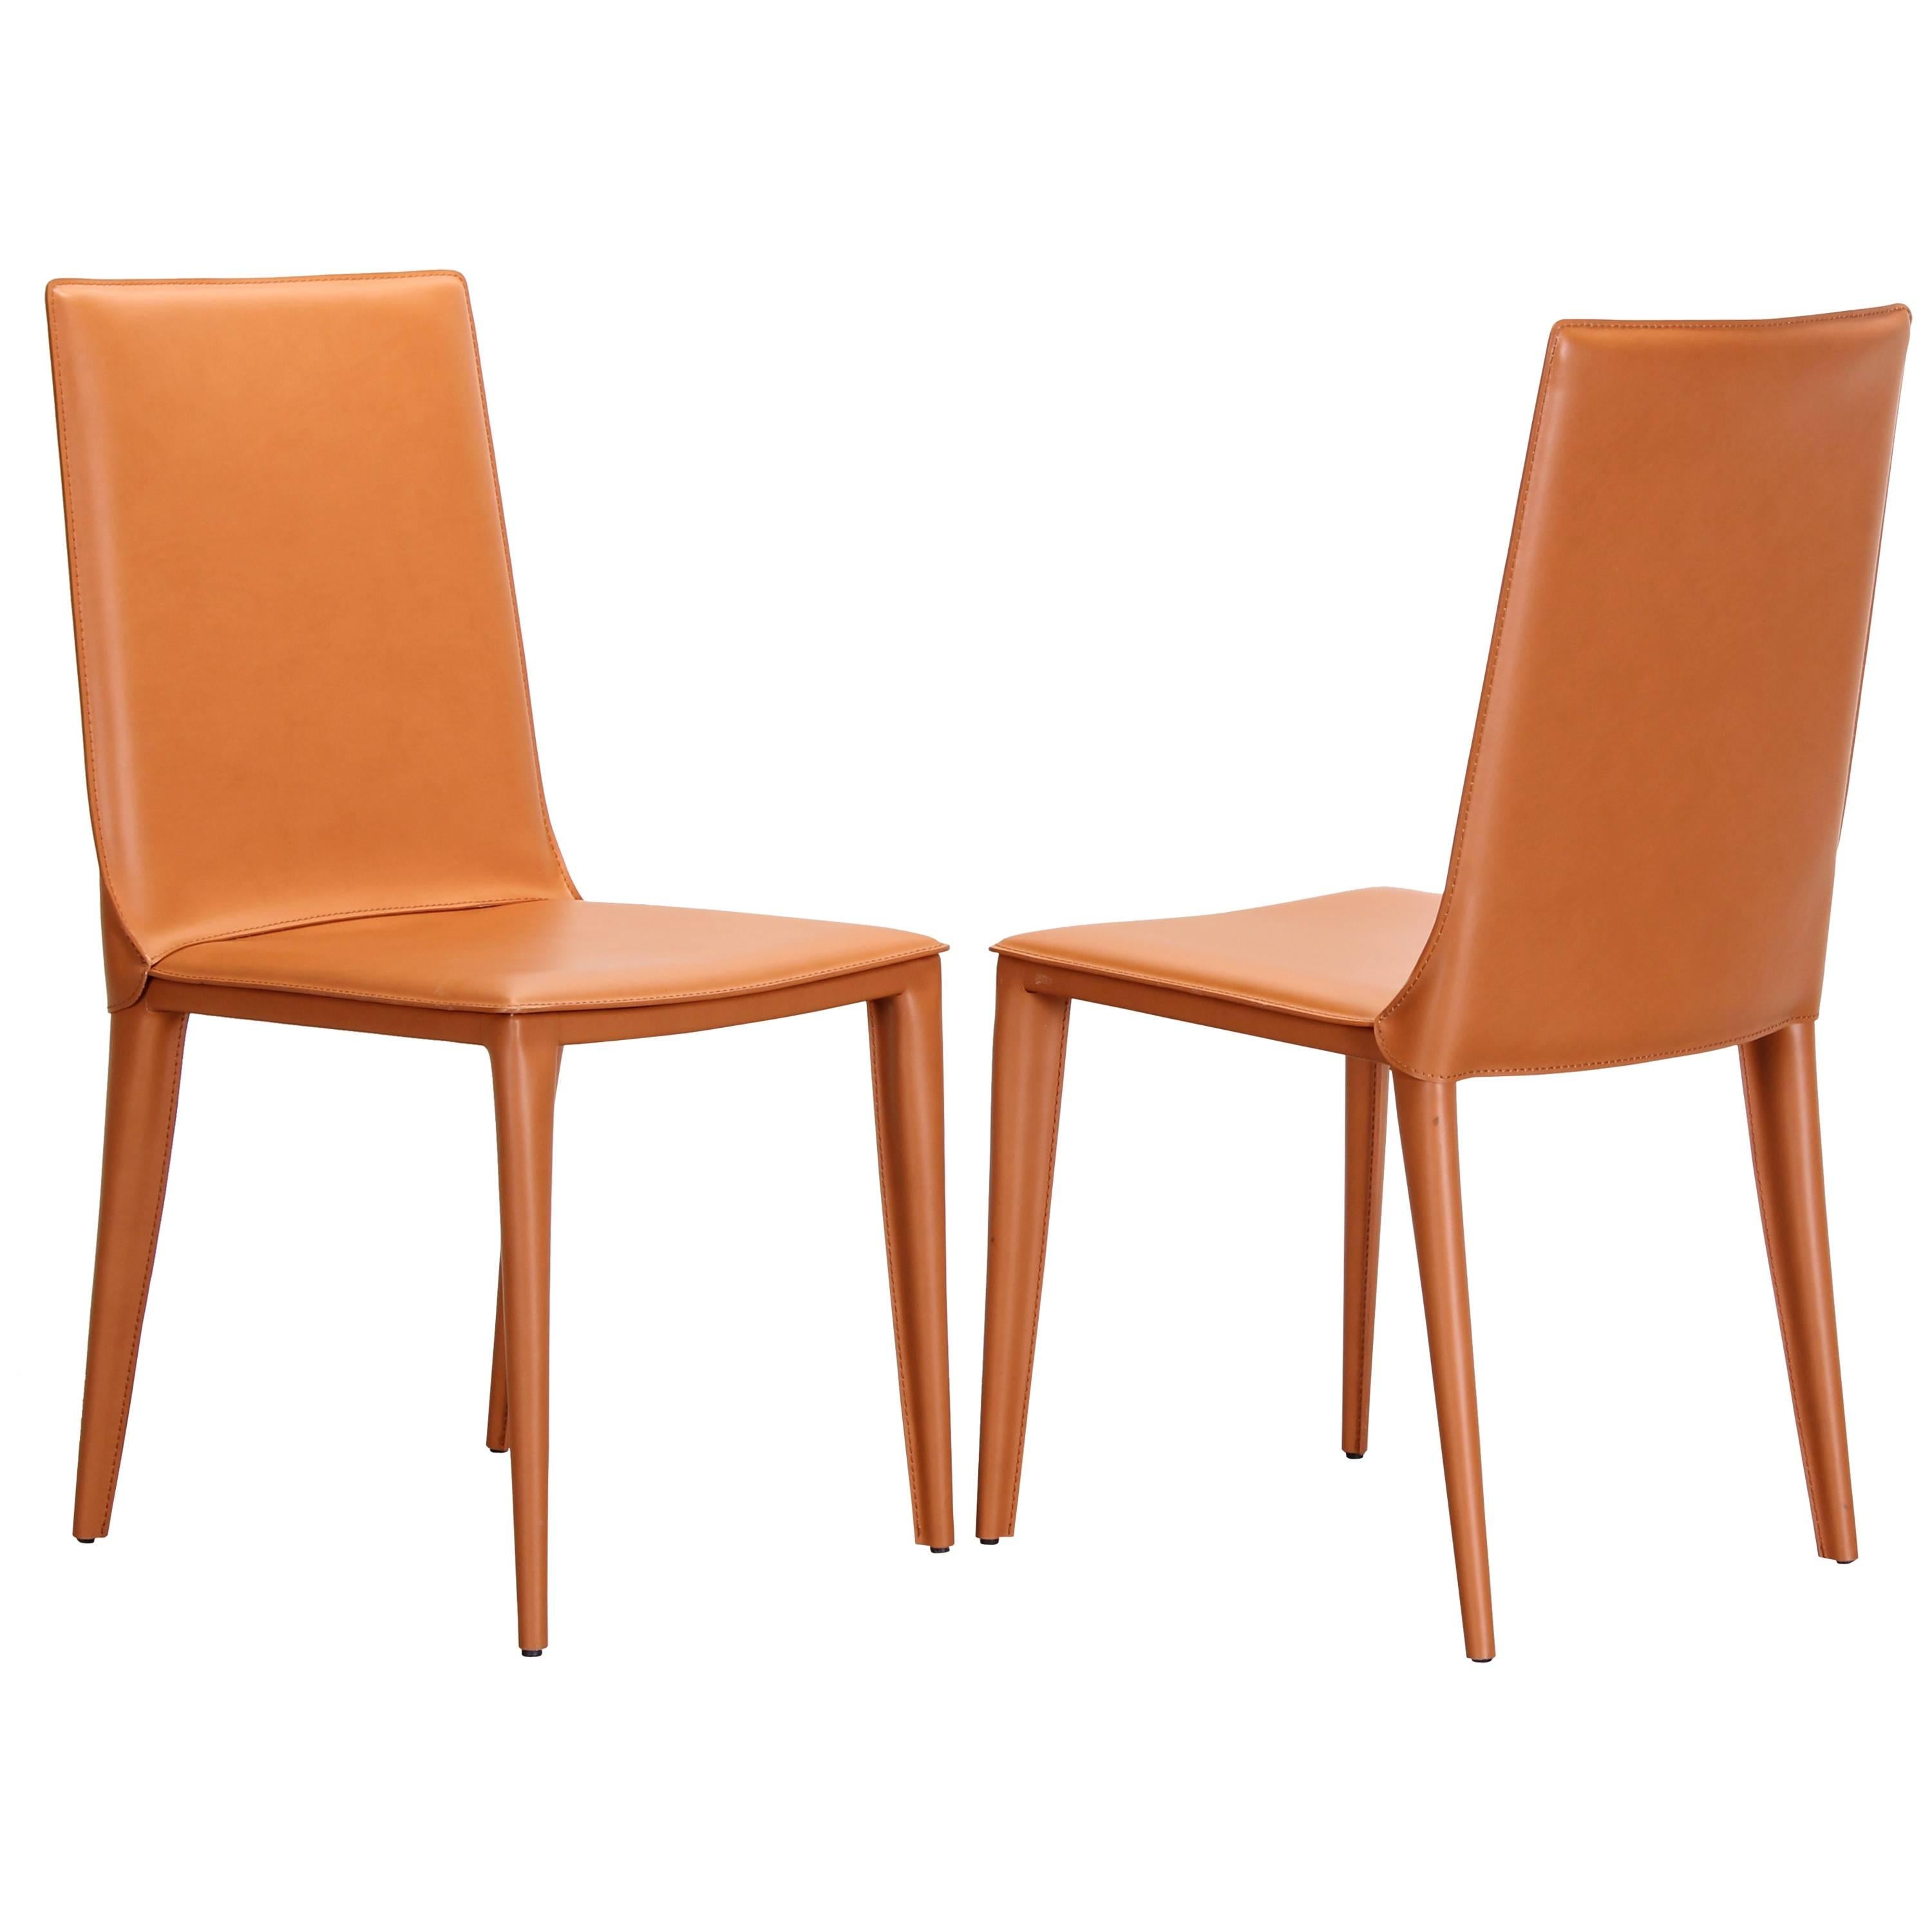 Pair of Frag Pradamano Leather Side Chairs, 2000 1 Available 